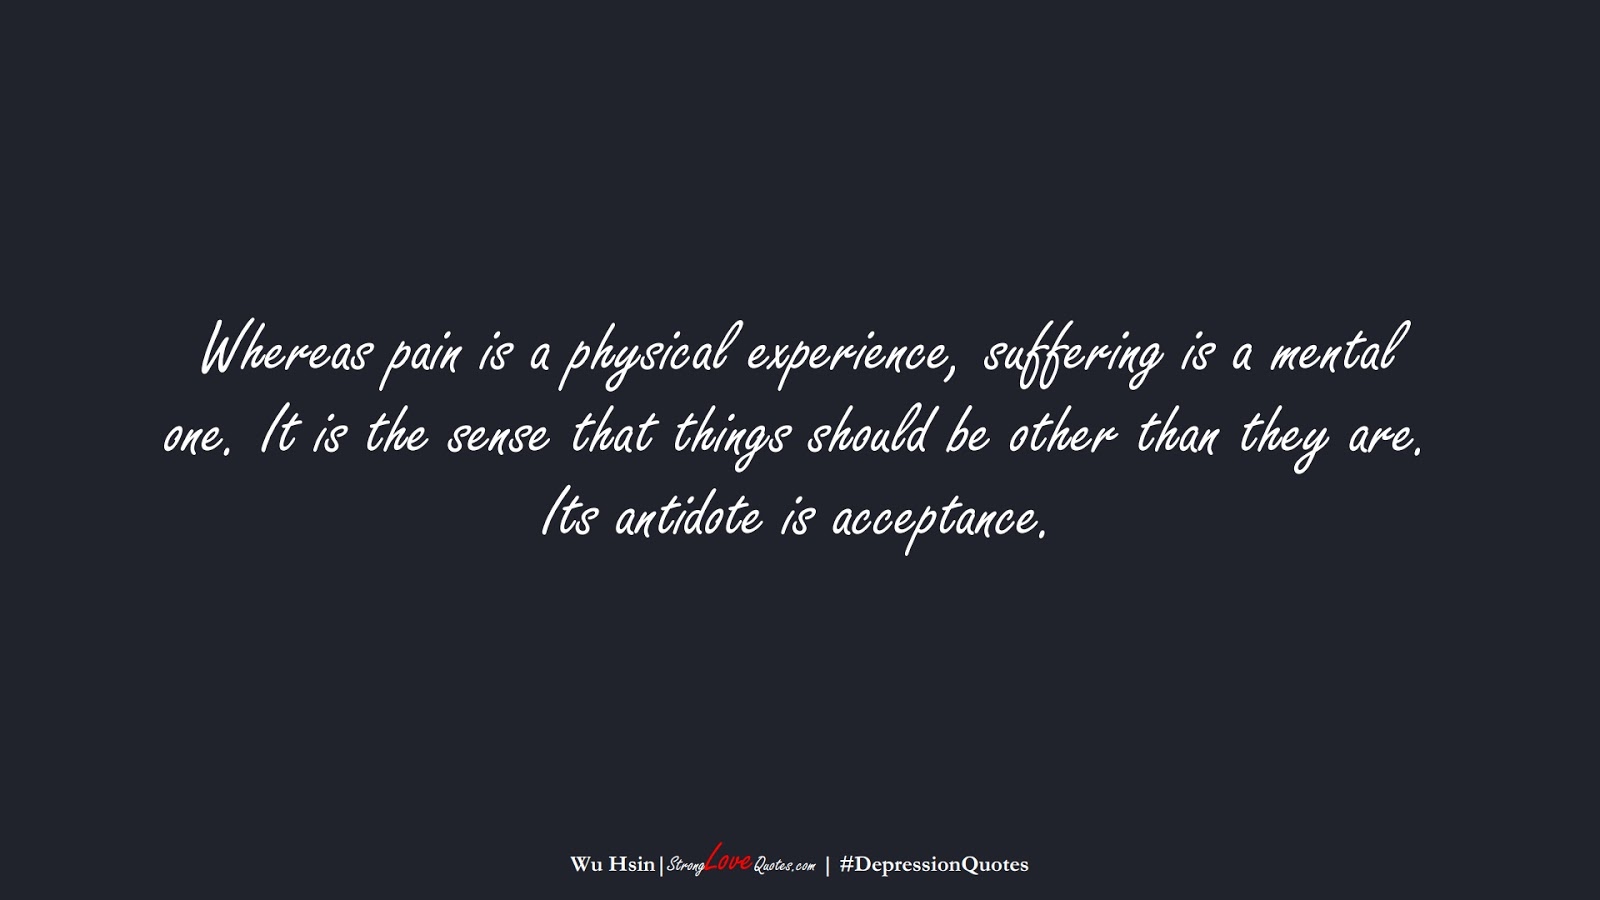 Whereas pain is a physical experience, suffering is a mental one. It is the sense that things should be other than they are. Its antidote is acceptance. (Wu Hsin);  #DepressionQuotes